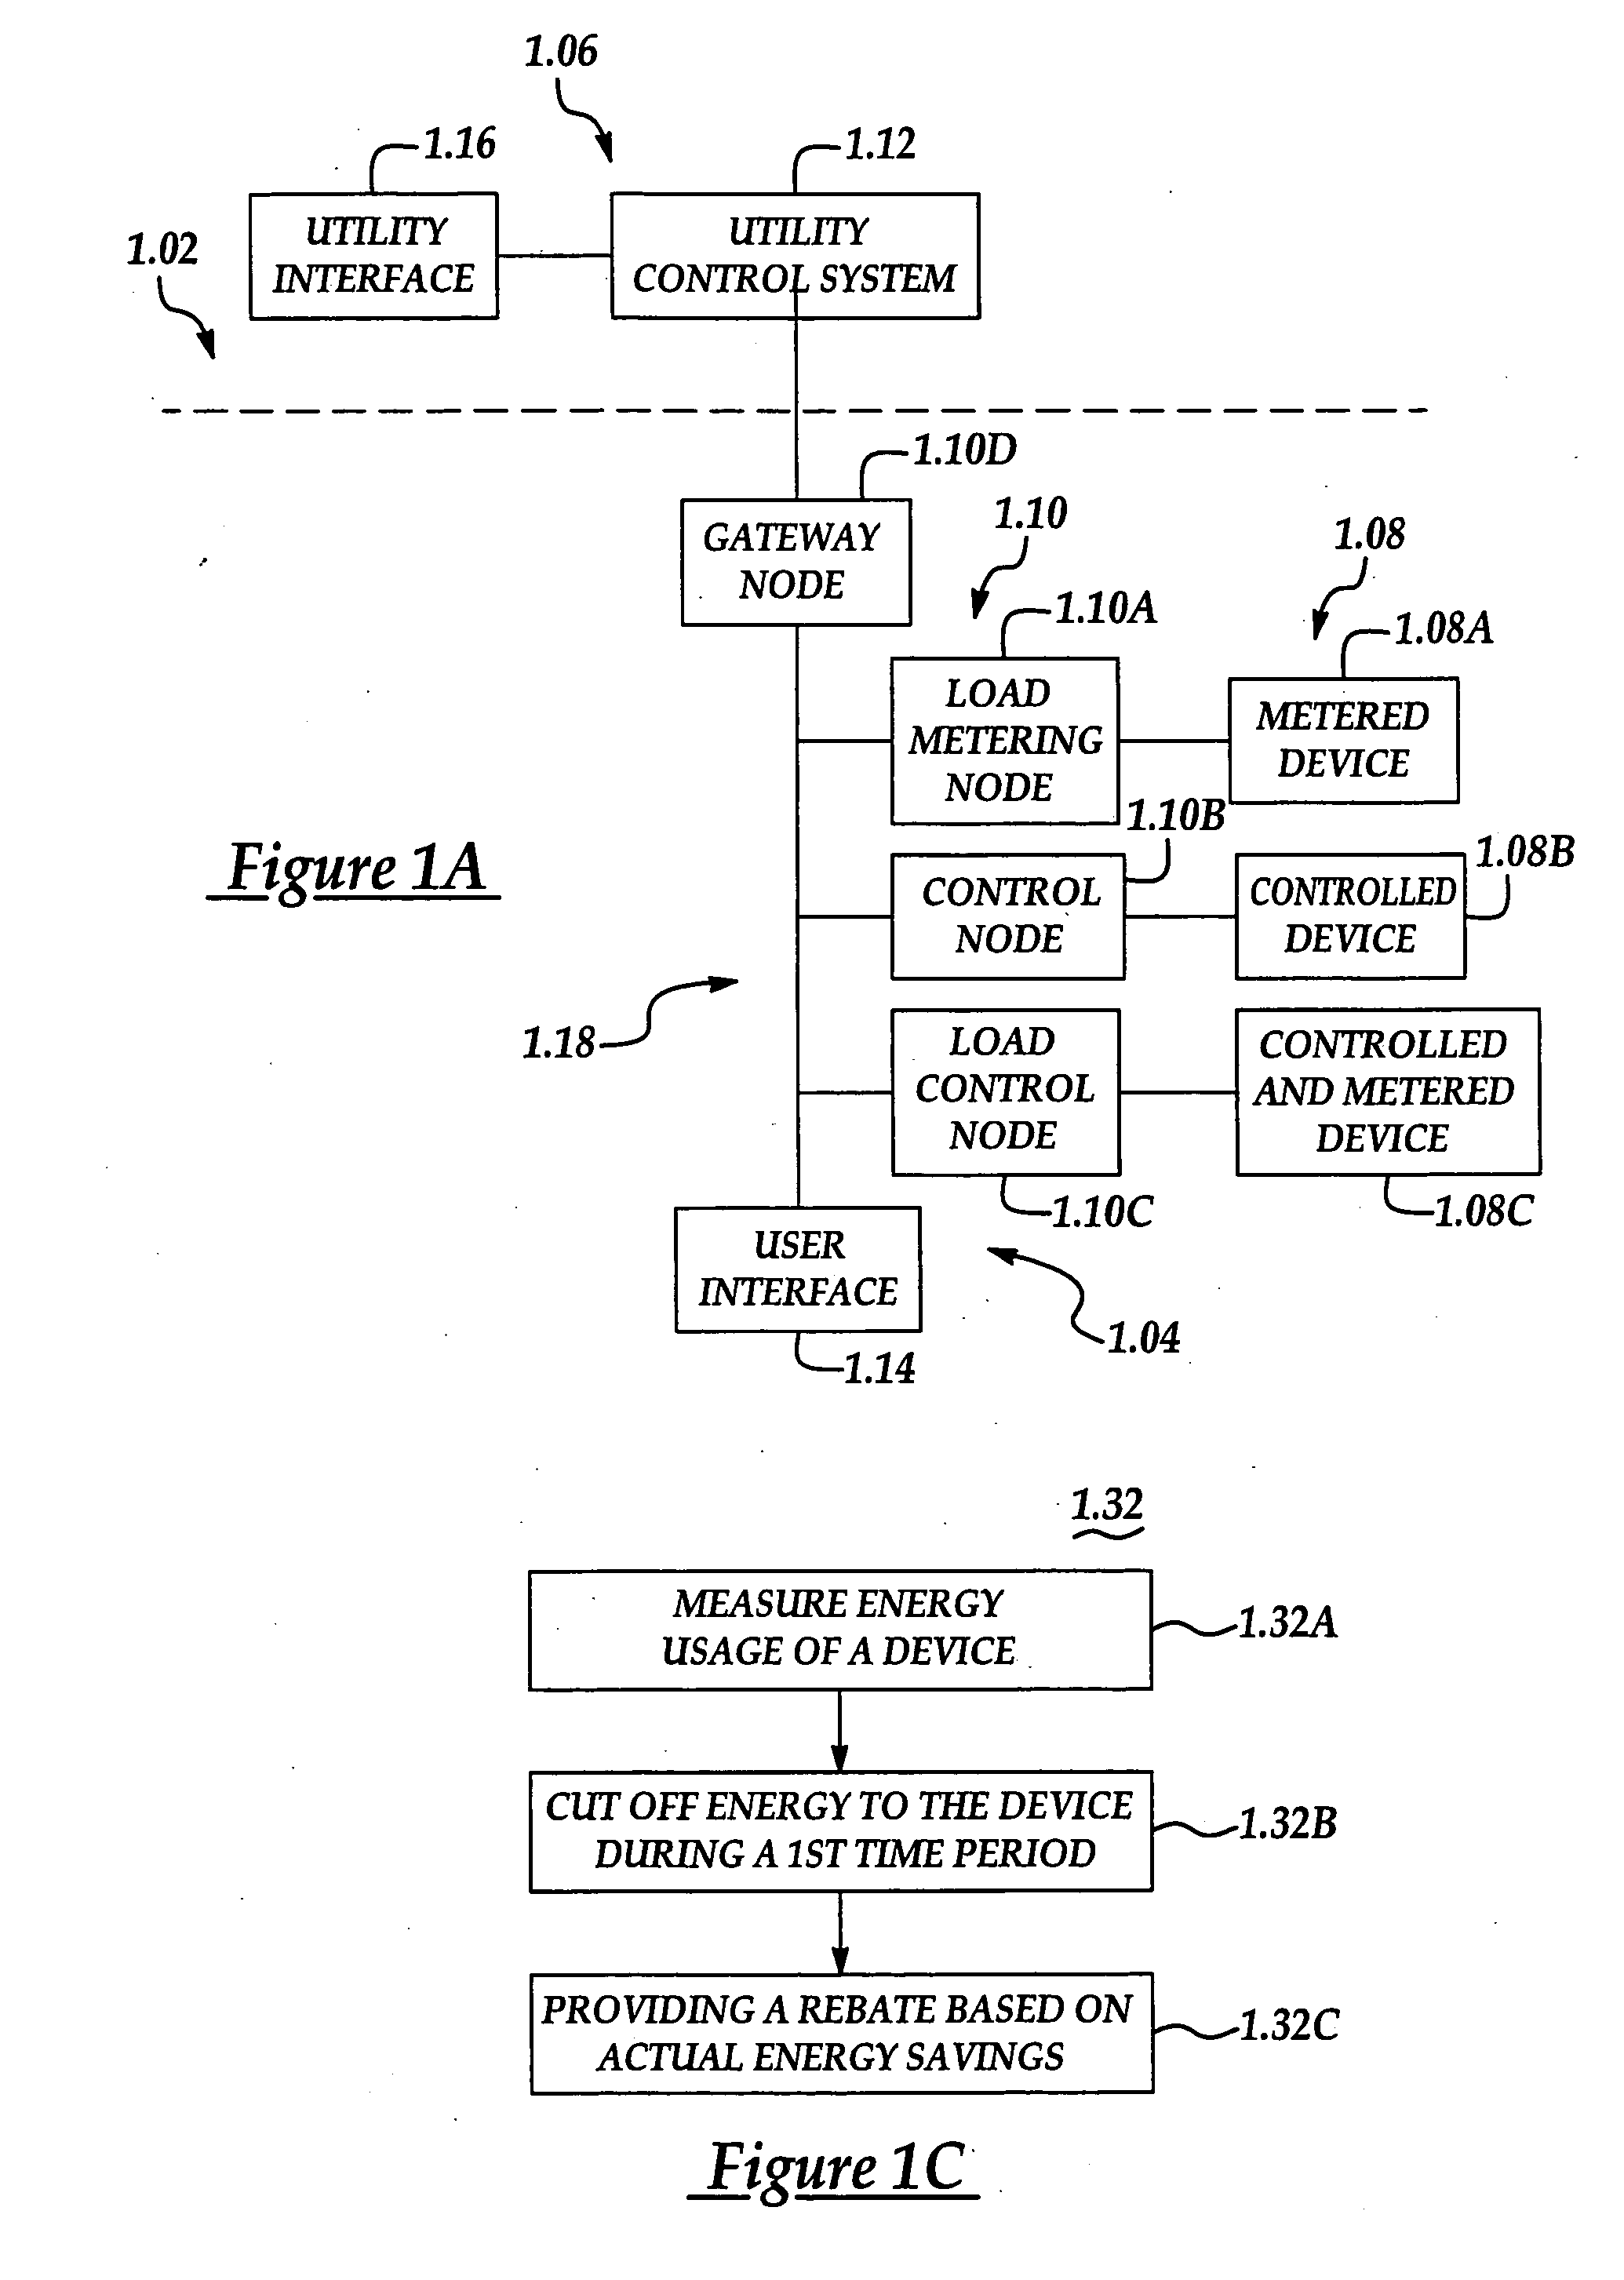 System and method of controlling an HVAC system